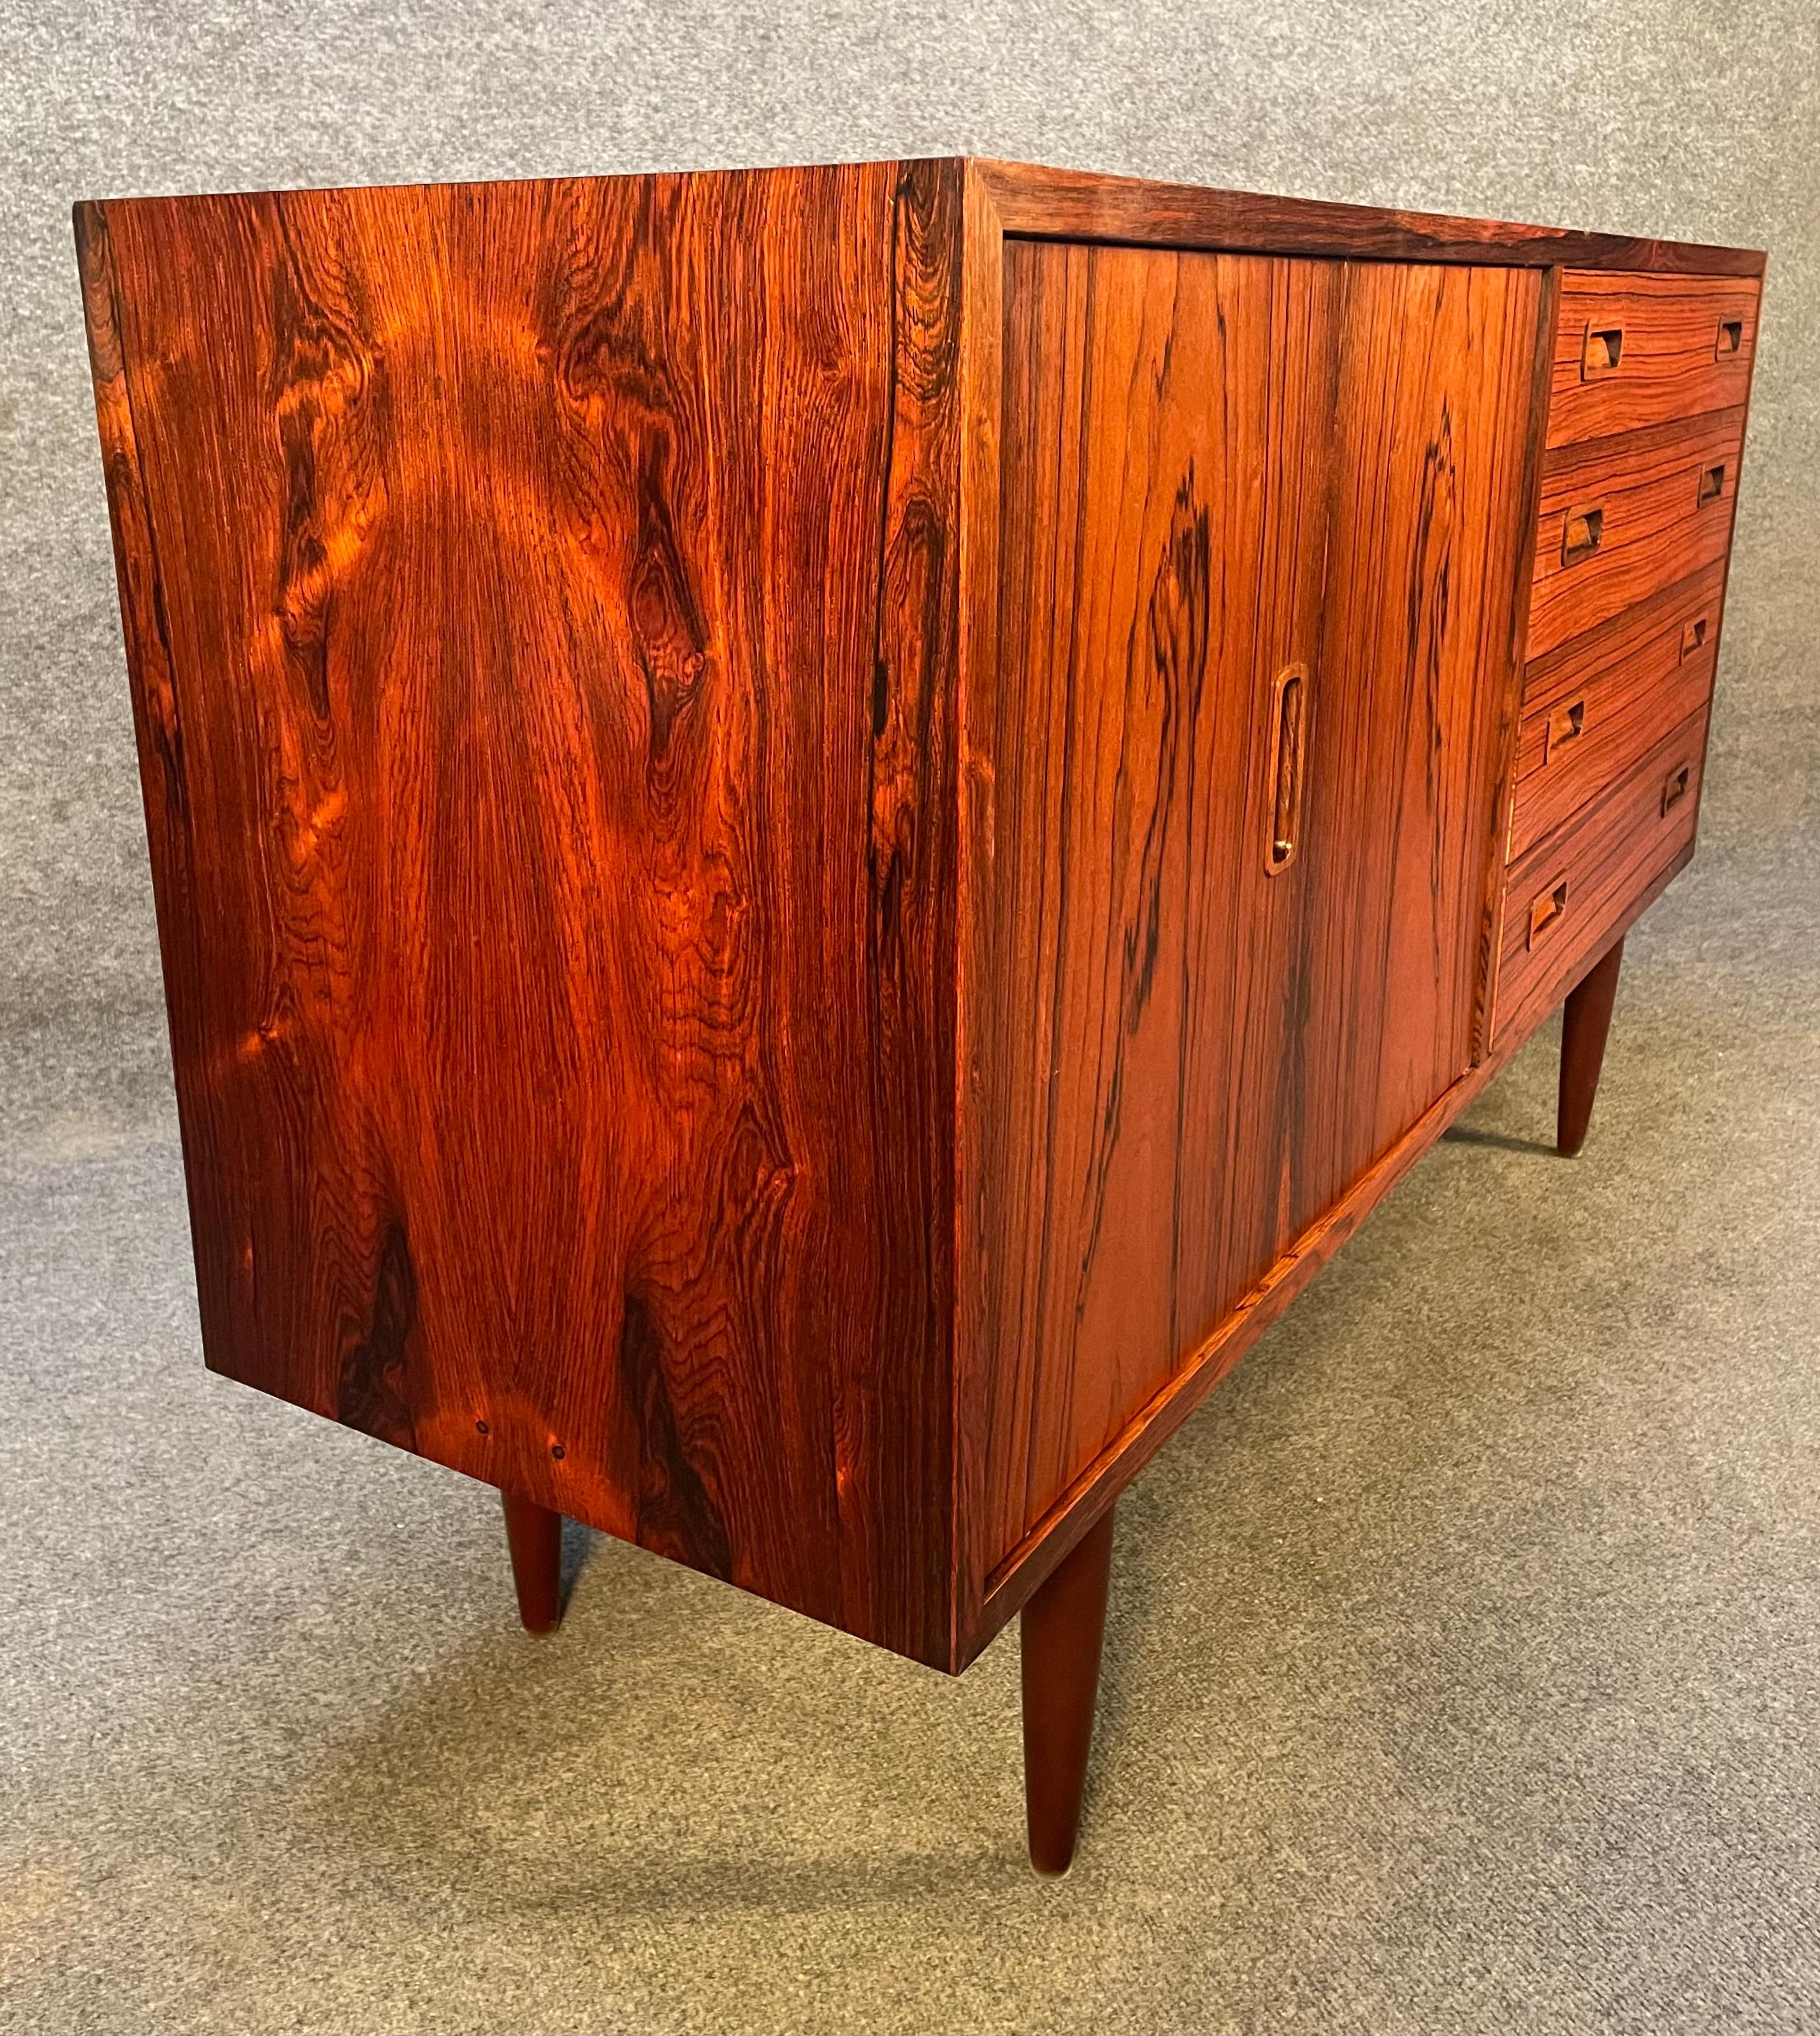 Mid-20th Century Vintage Danish Mid-Century Modern Rosewood Credenza by Poul Hundevad